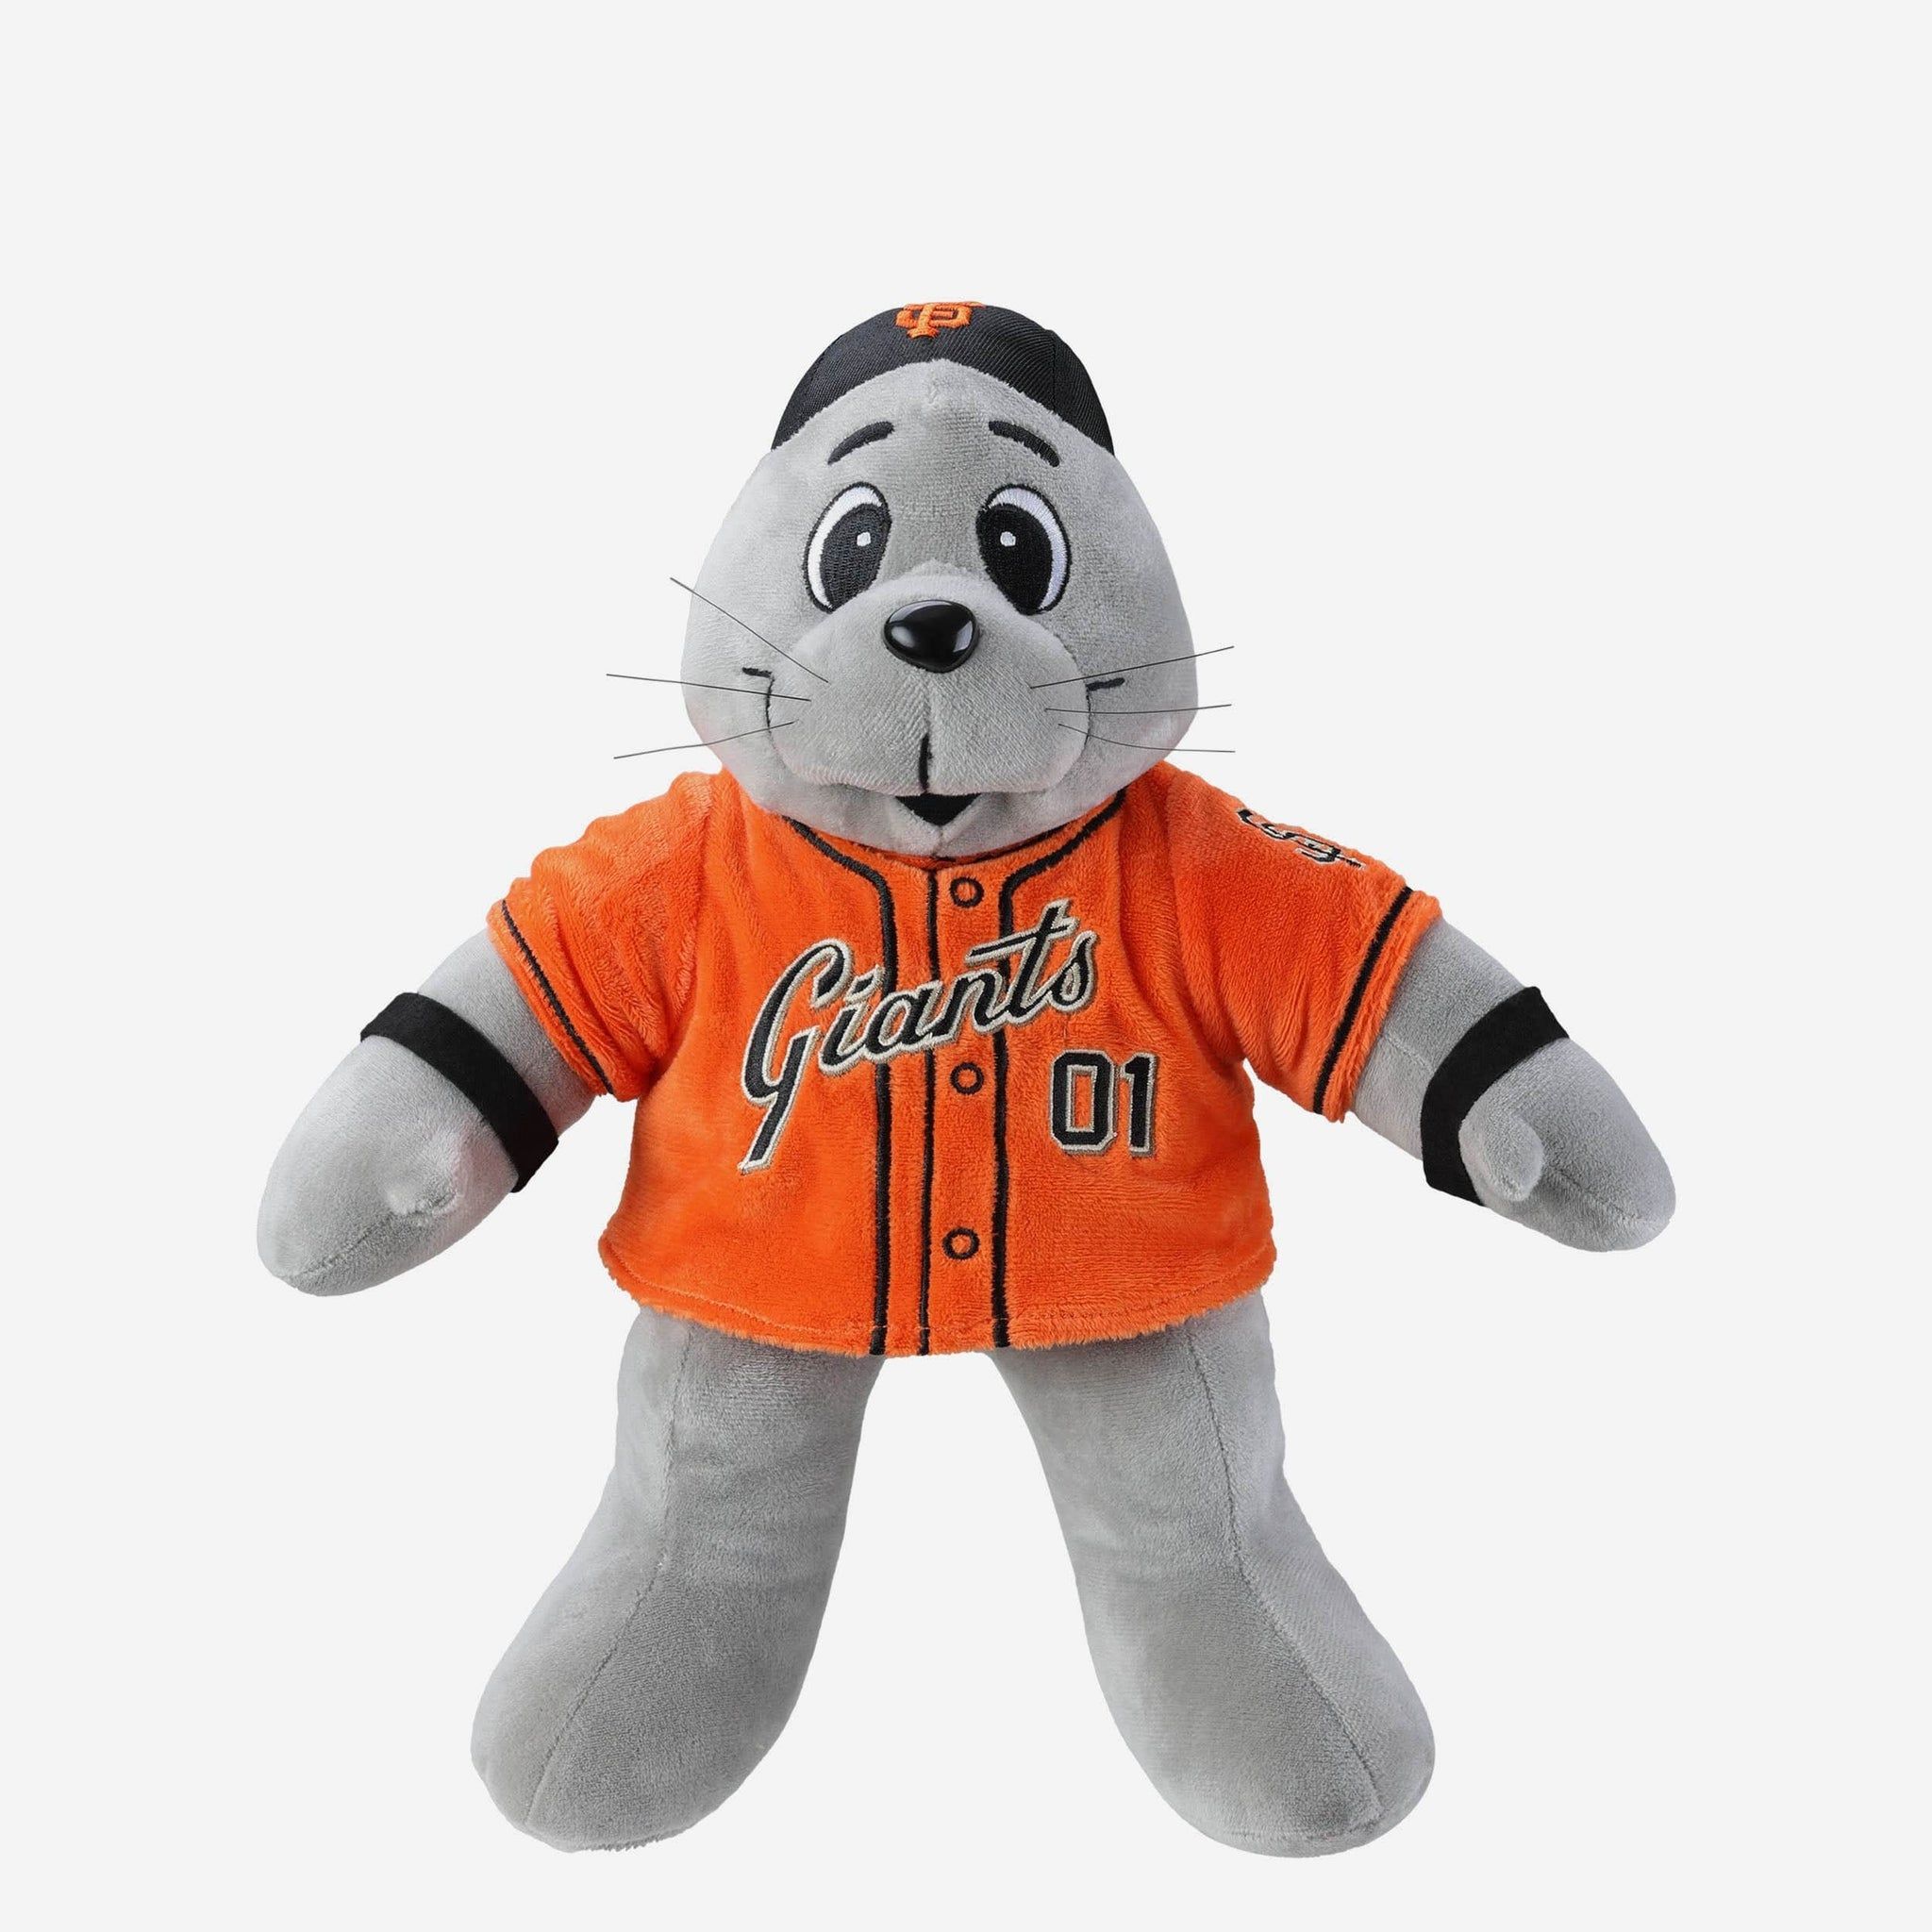 Last Minute Holiday Gifts for Every #SFGiants Fan